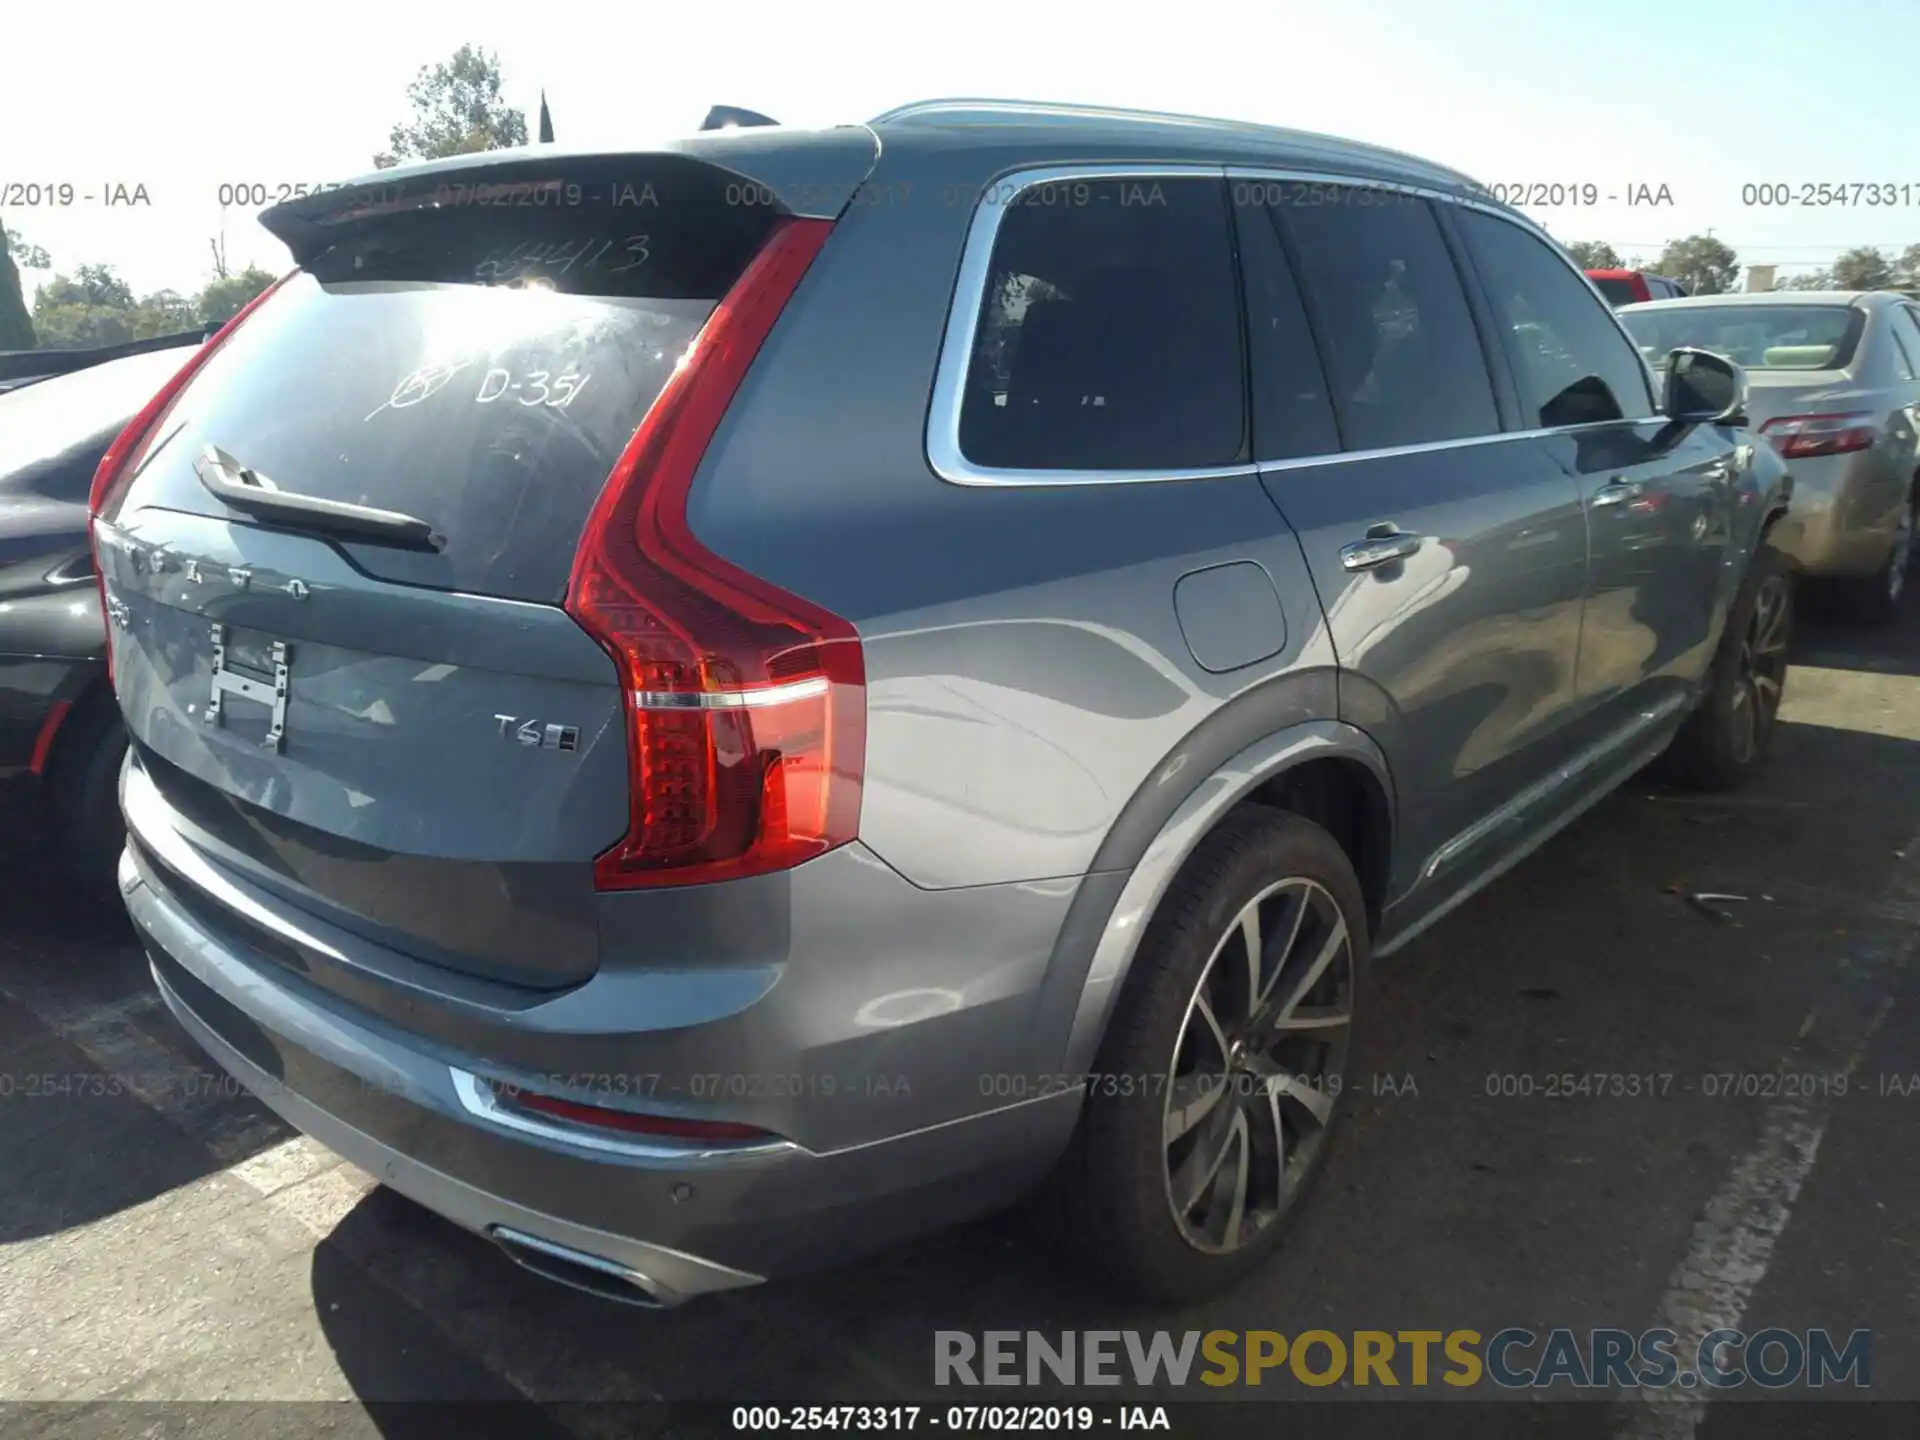 4 Photograph of a damaged car YV4A22PL0K1432897 VOLVO XC90 2019